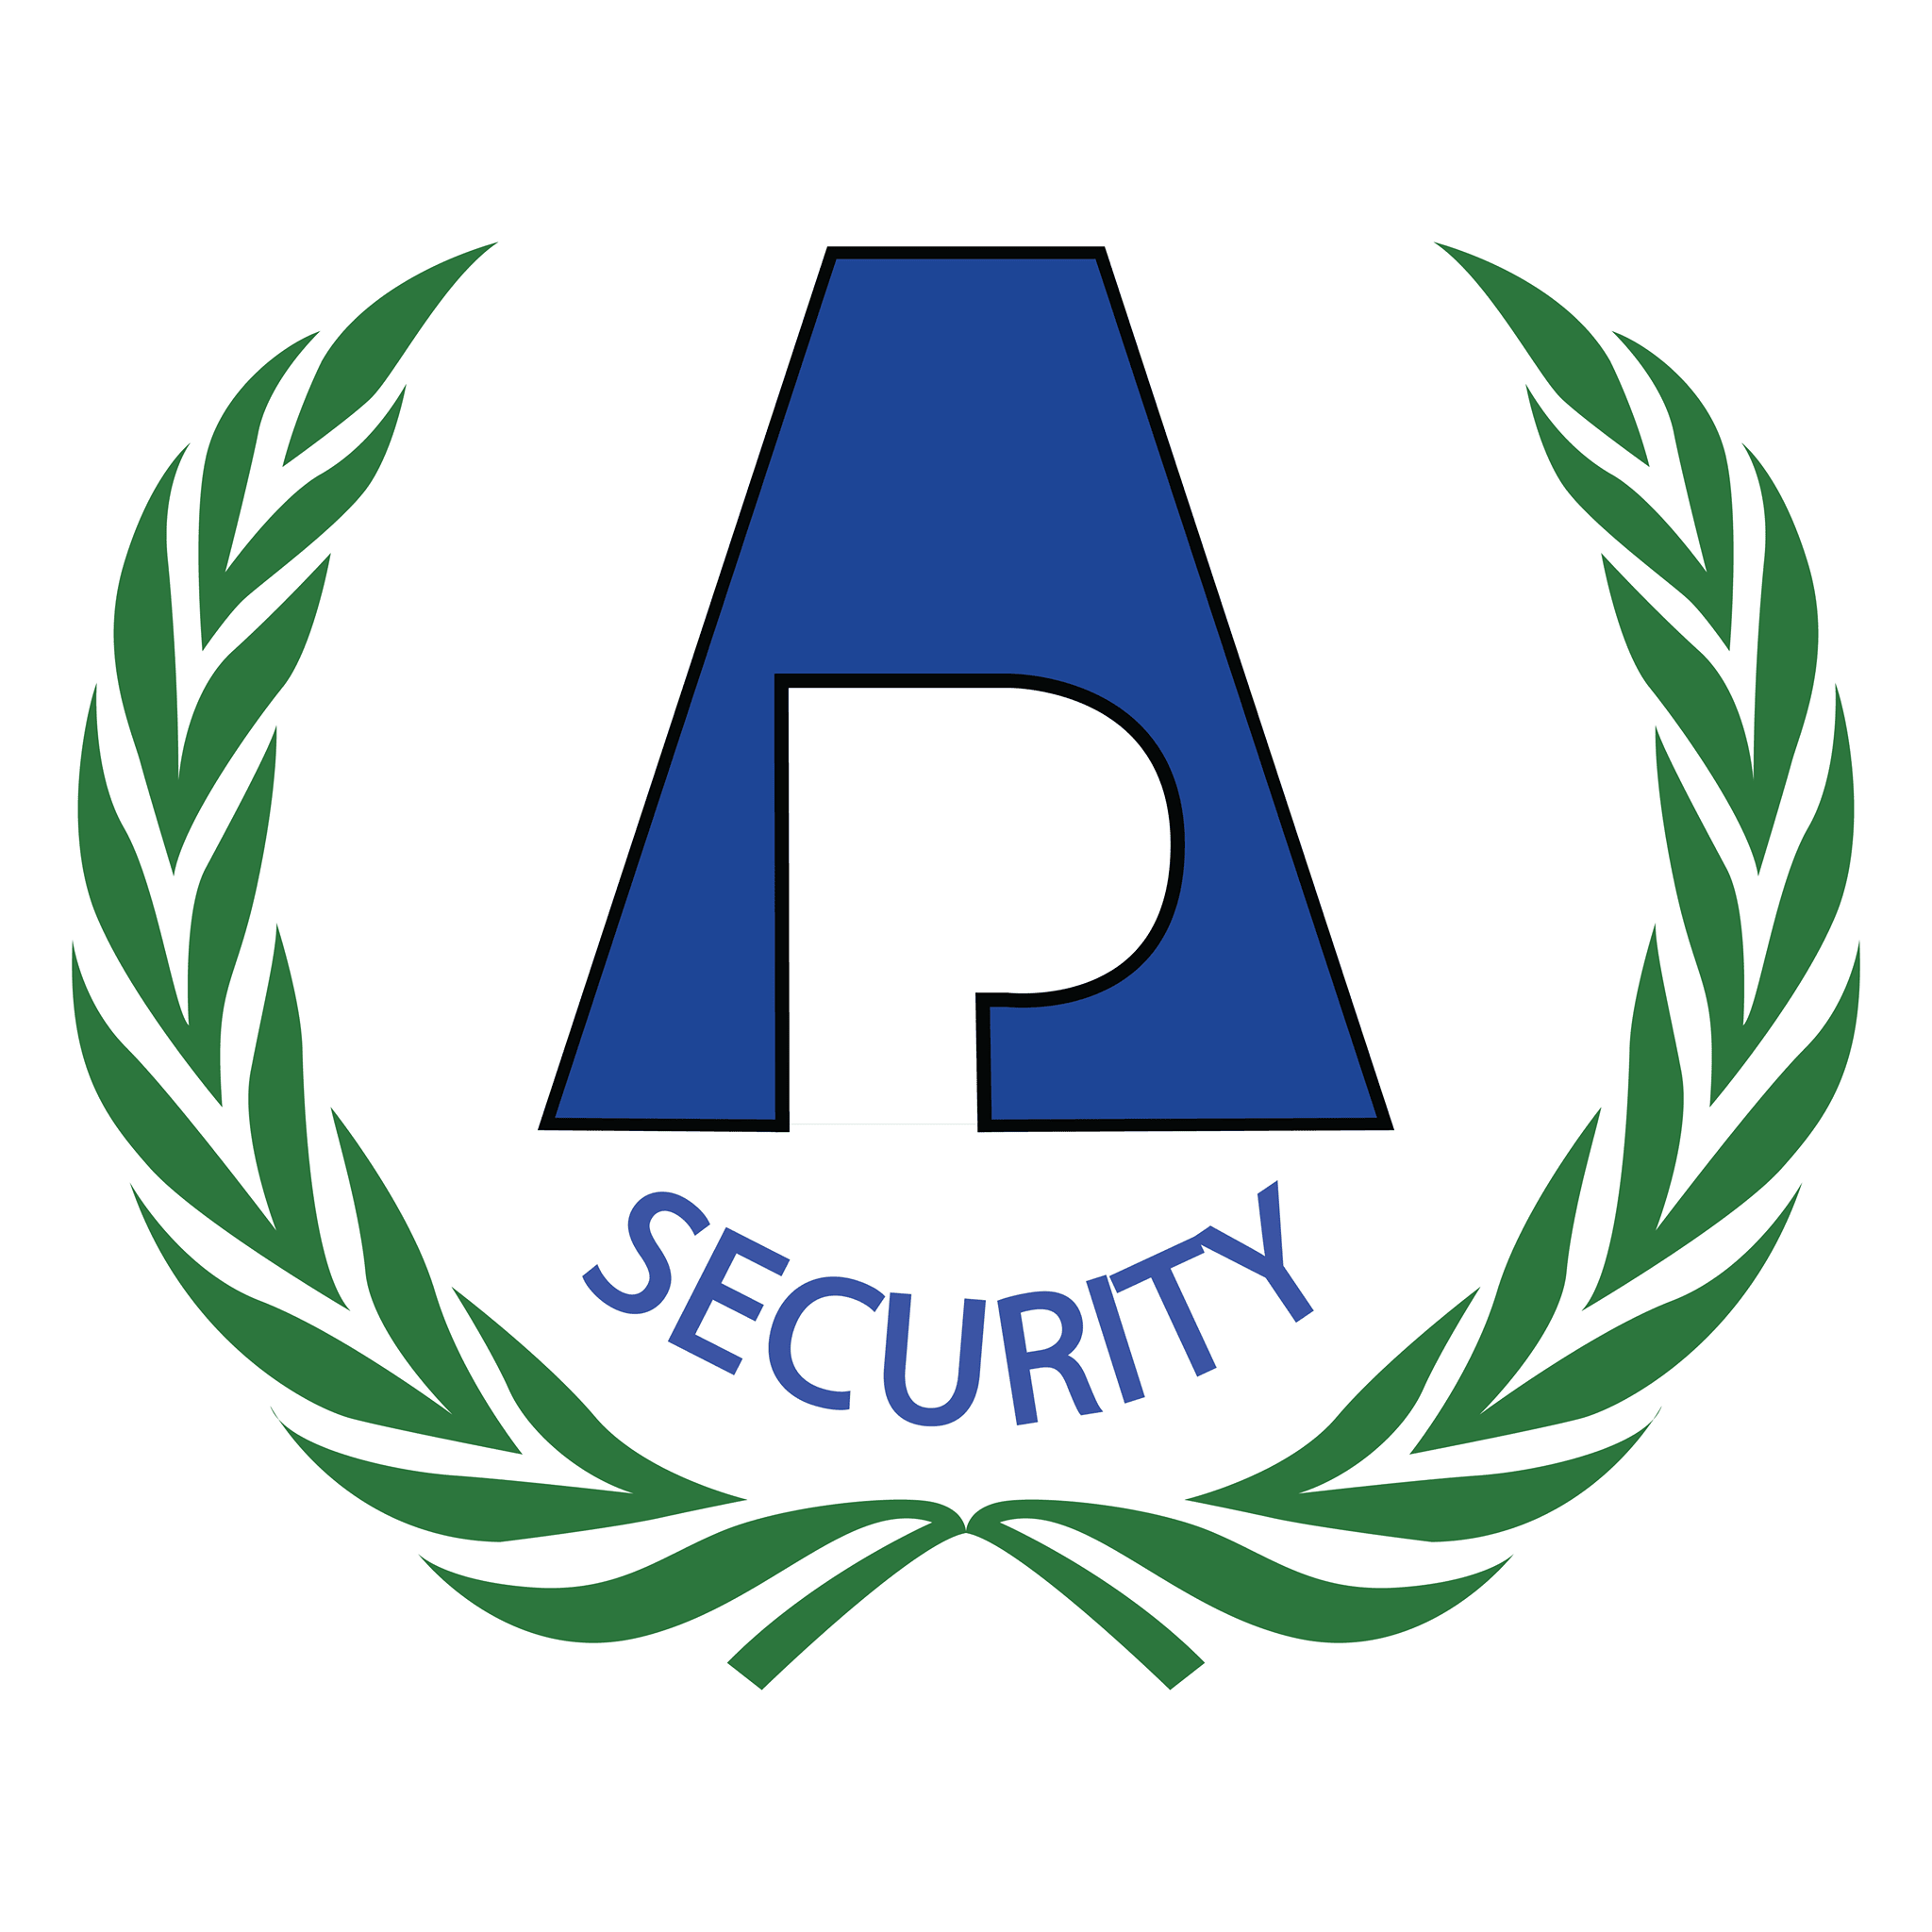 Applied Protection Pte. Ltd. company logo